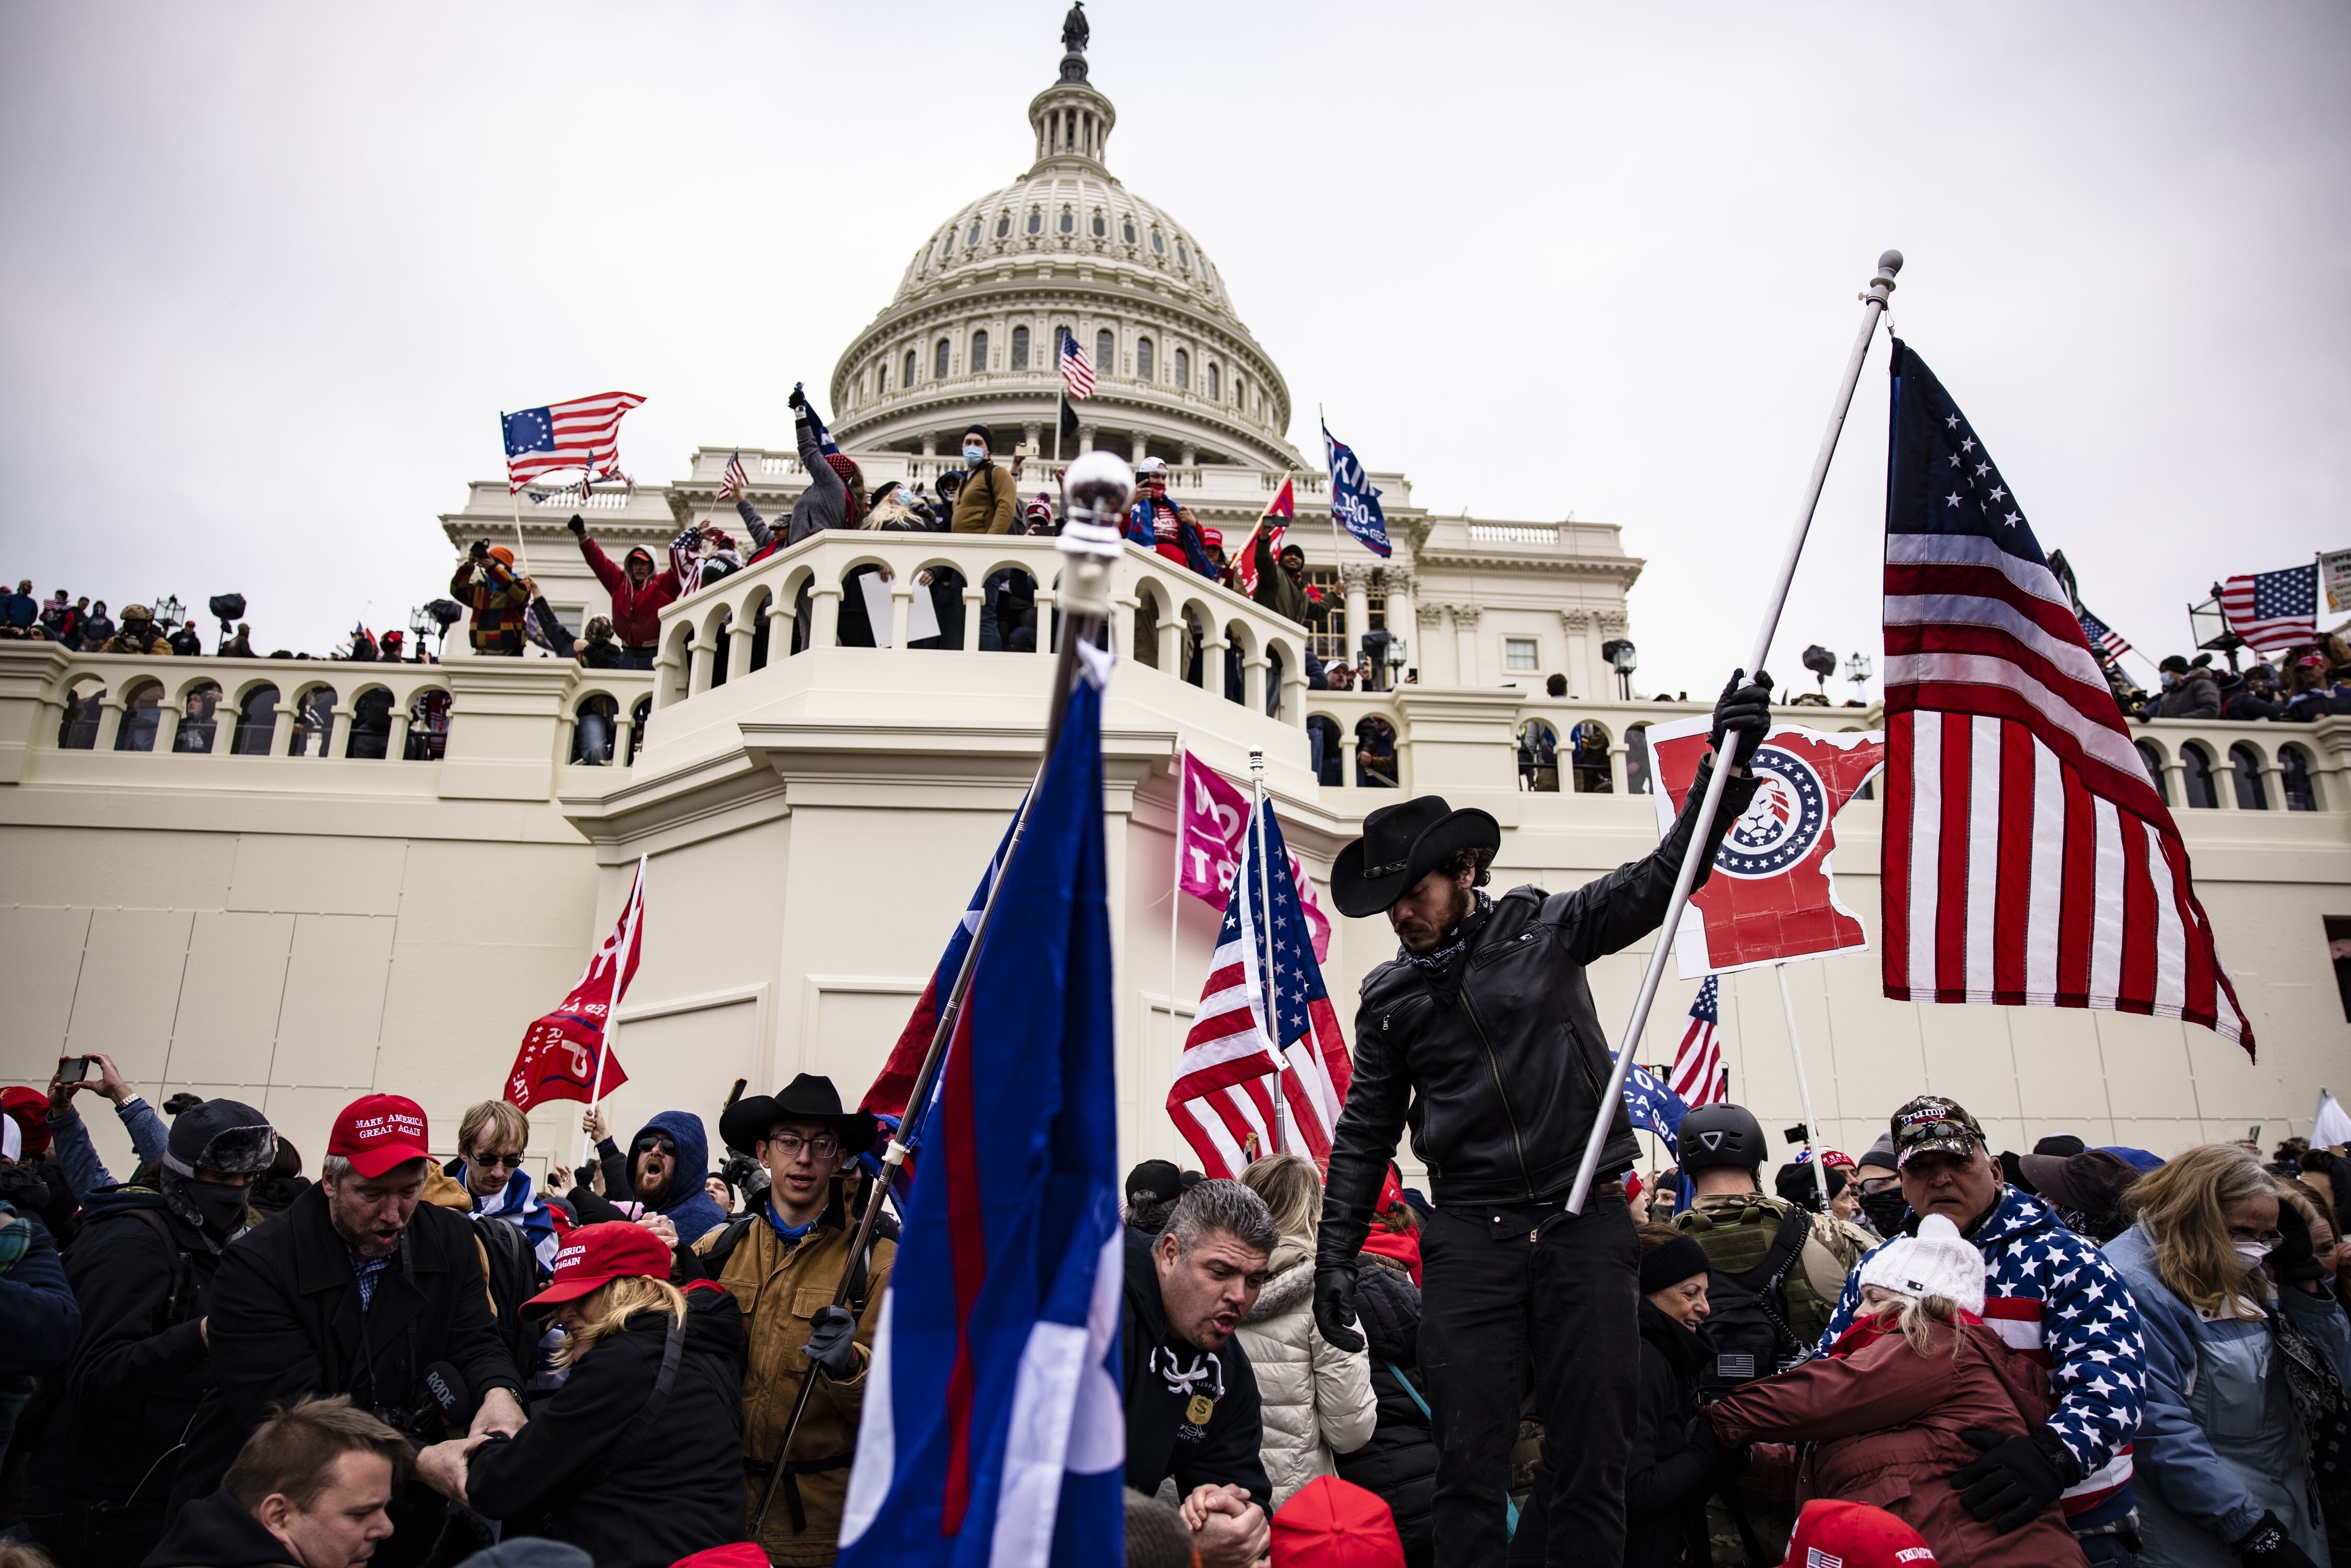 Supporters of former US president Donald Trump storm the US Capitol following a rally on January 6 in Washington. Photo: AFP